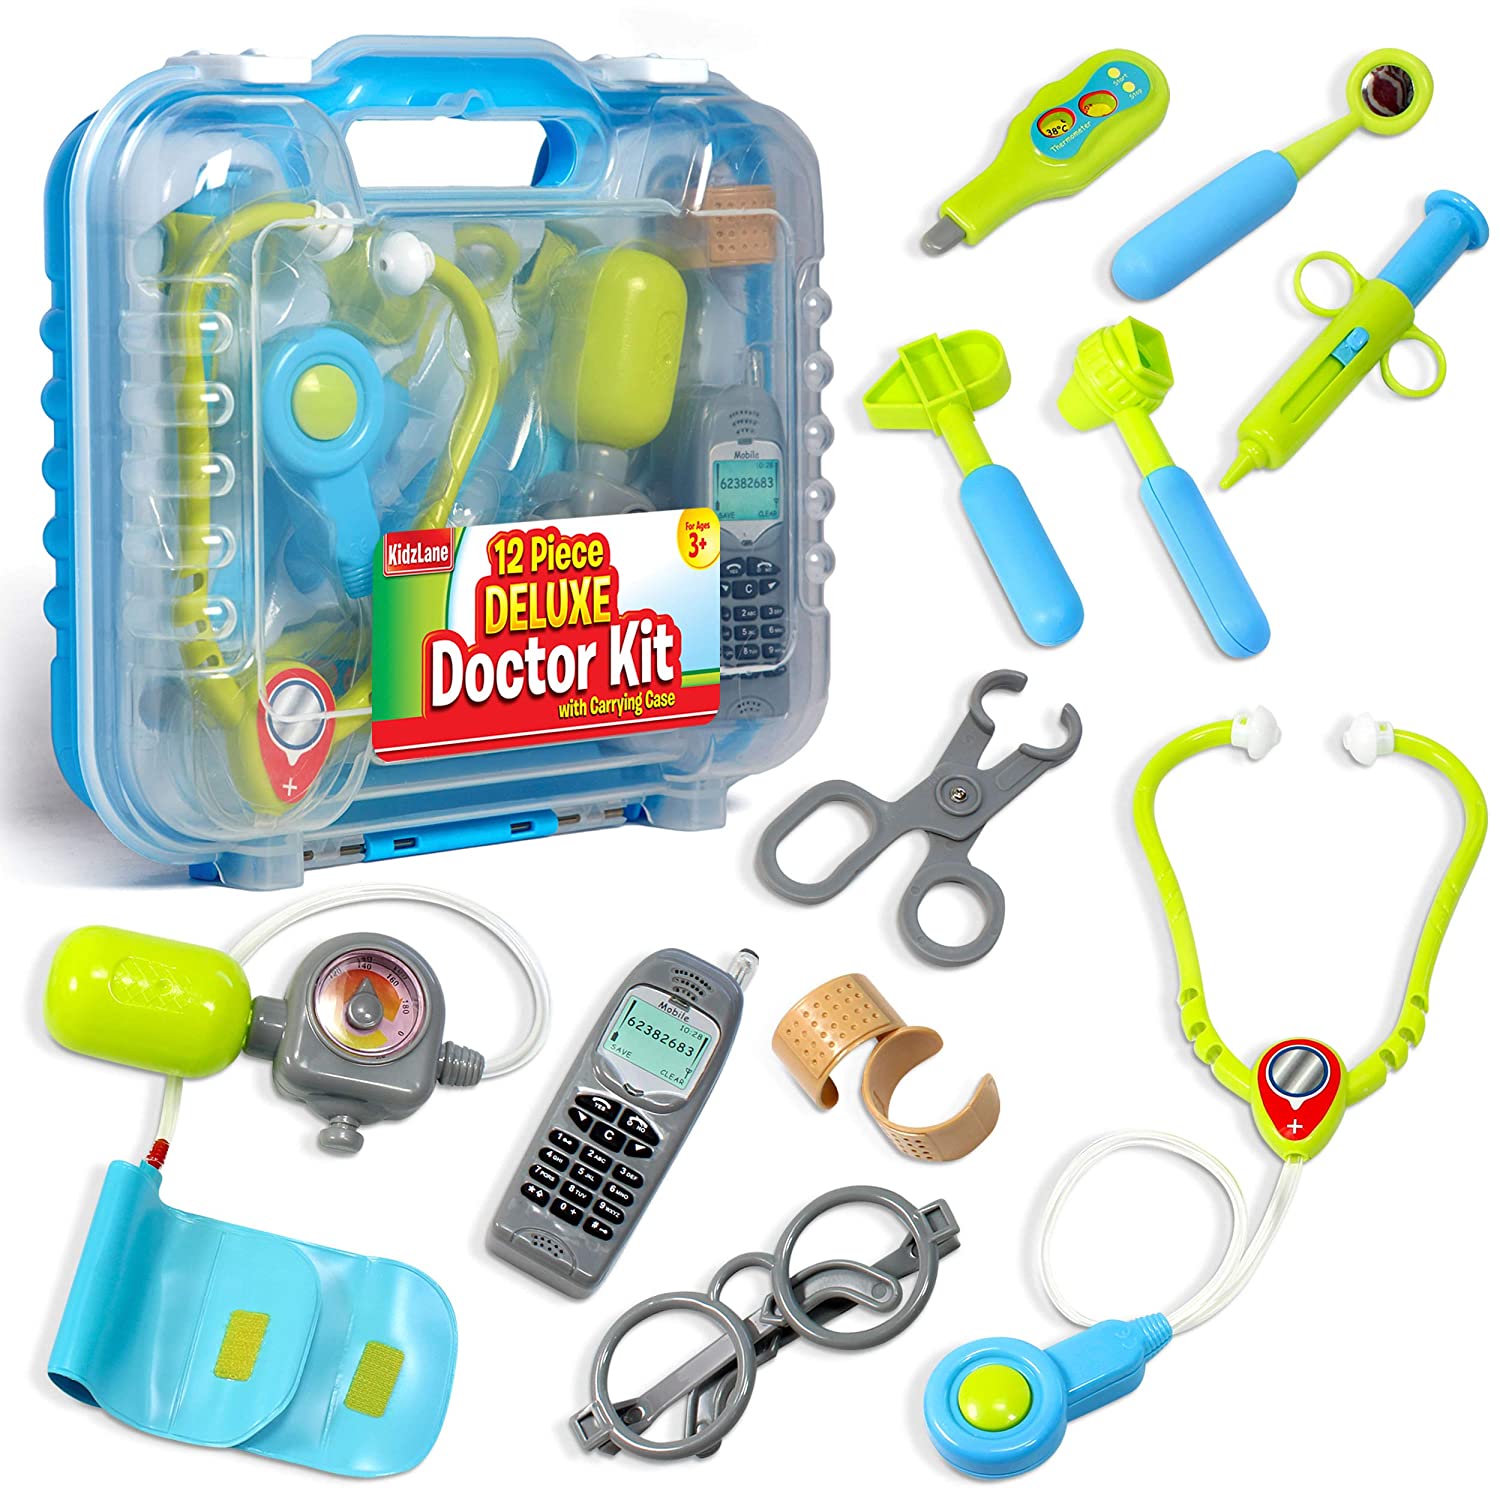 Top 9 Best Toy Doctor Kits Reviews in 2023 1